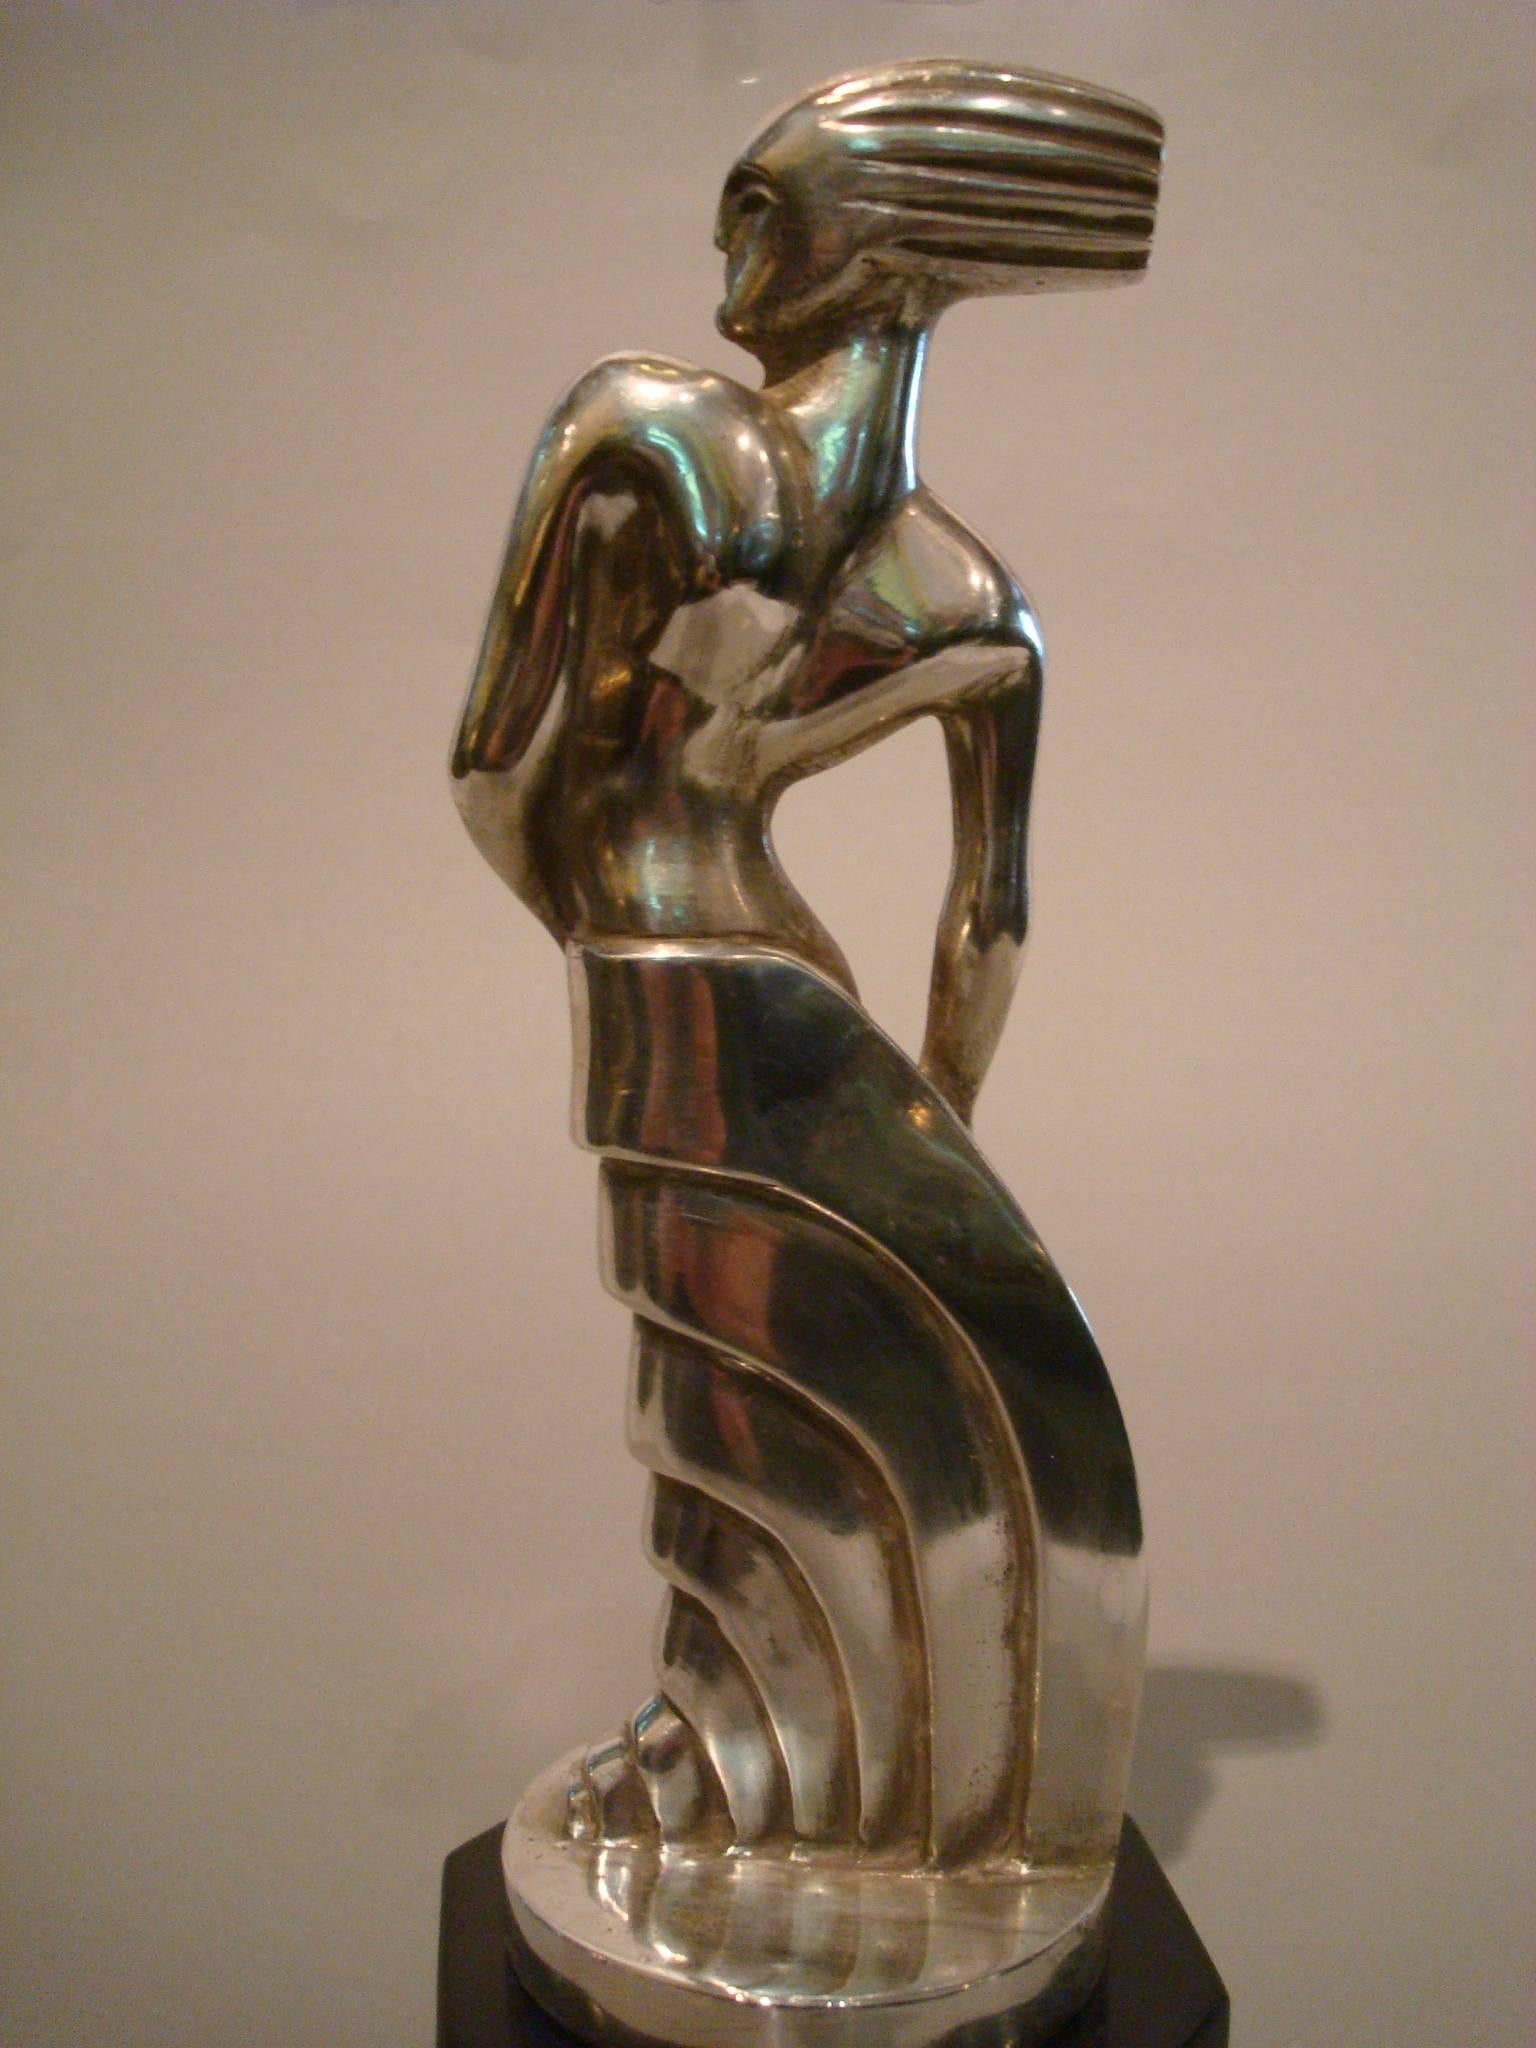 20th Century Art Deco Silvered Bronze Sculpture Standing Woman by S. Rueff, France, 1925